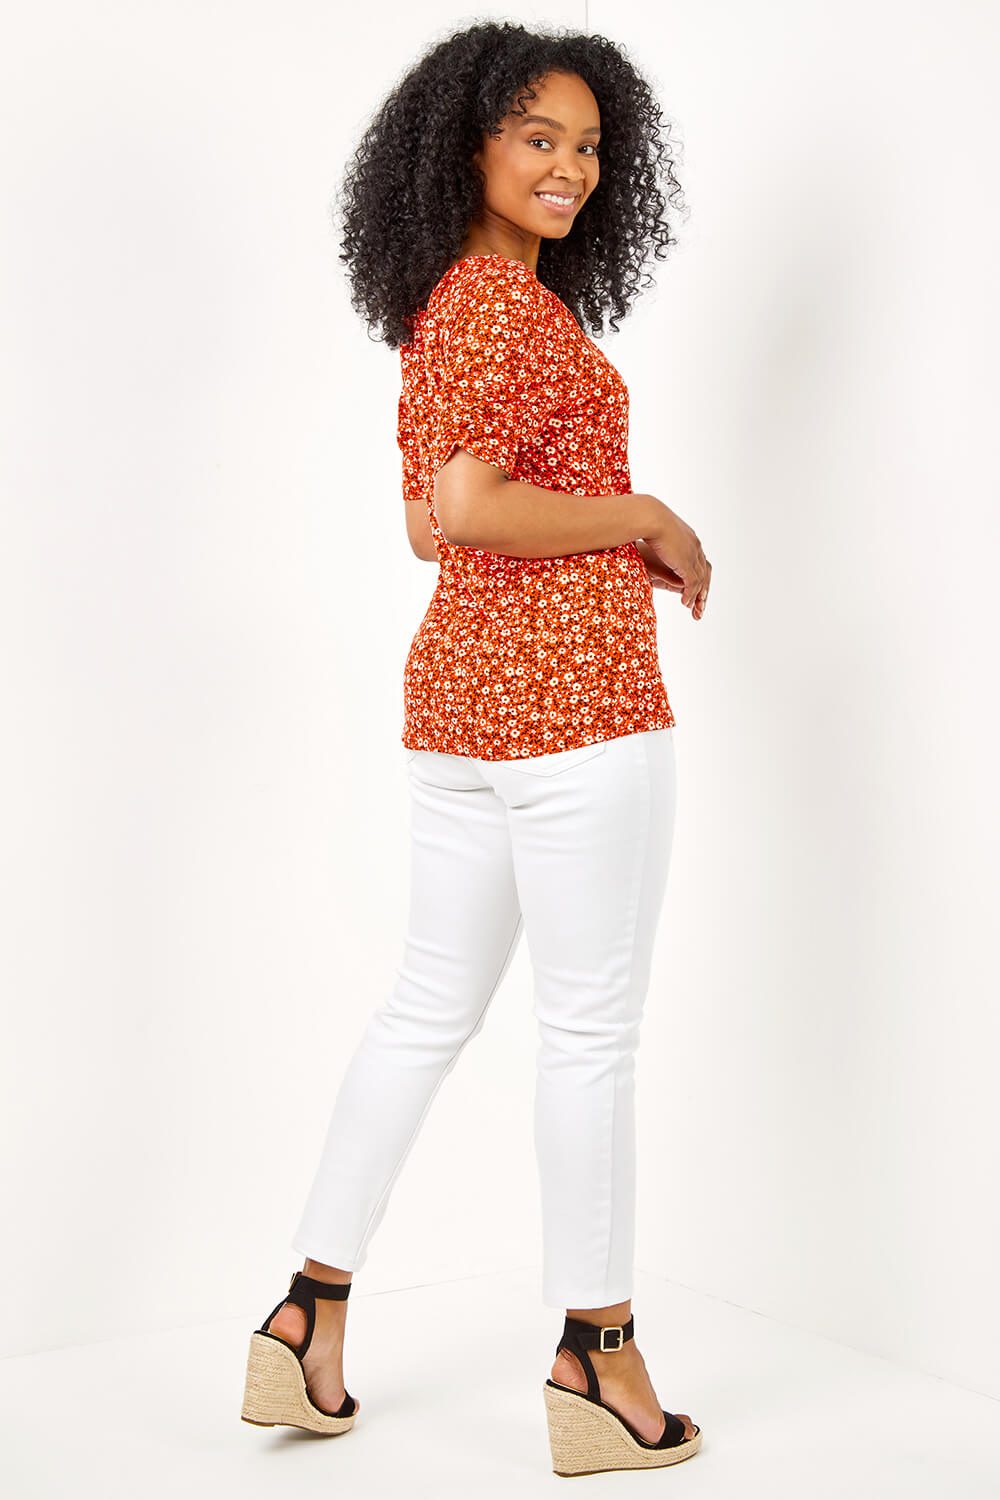 Red Petite Floral Print Stretch Jersey Top, Image 2 of 5